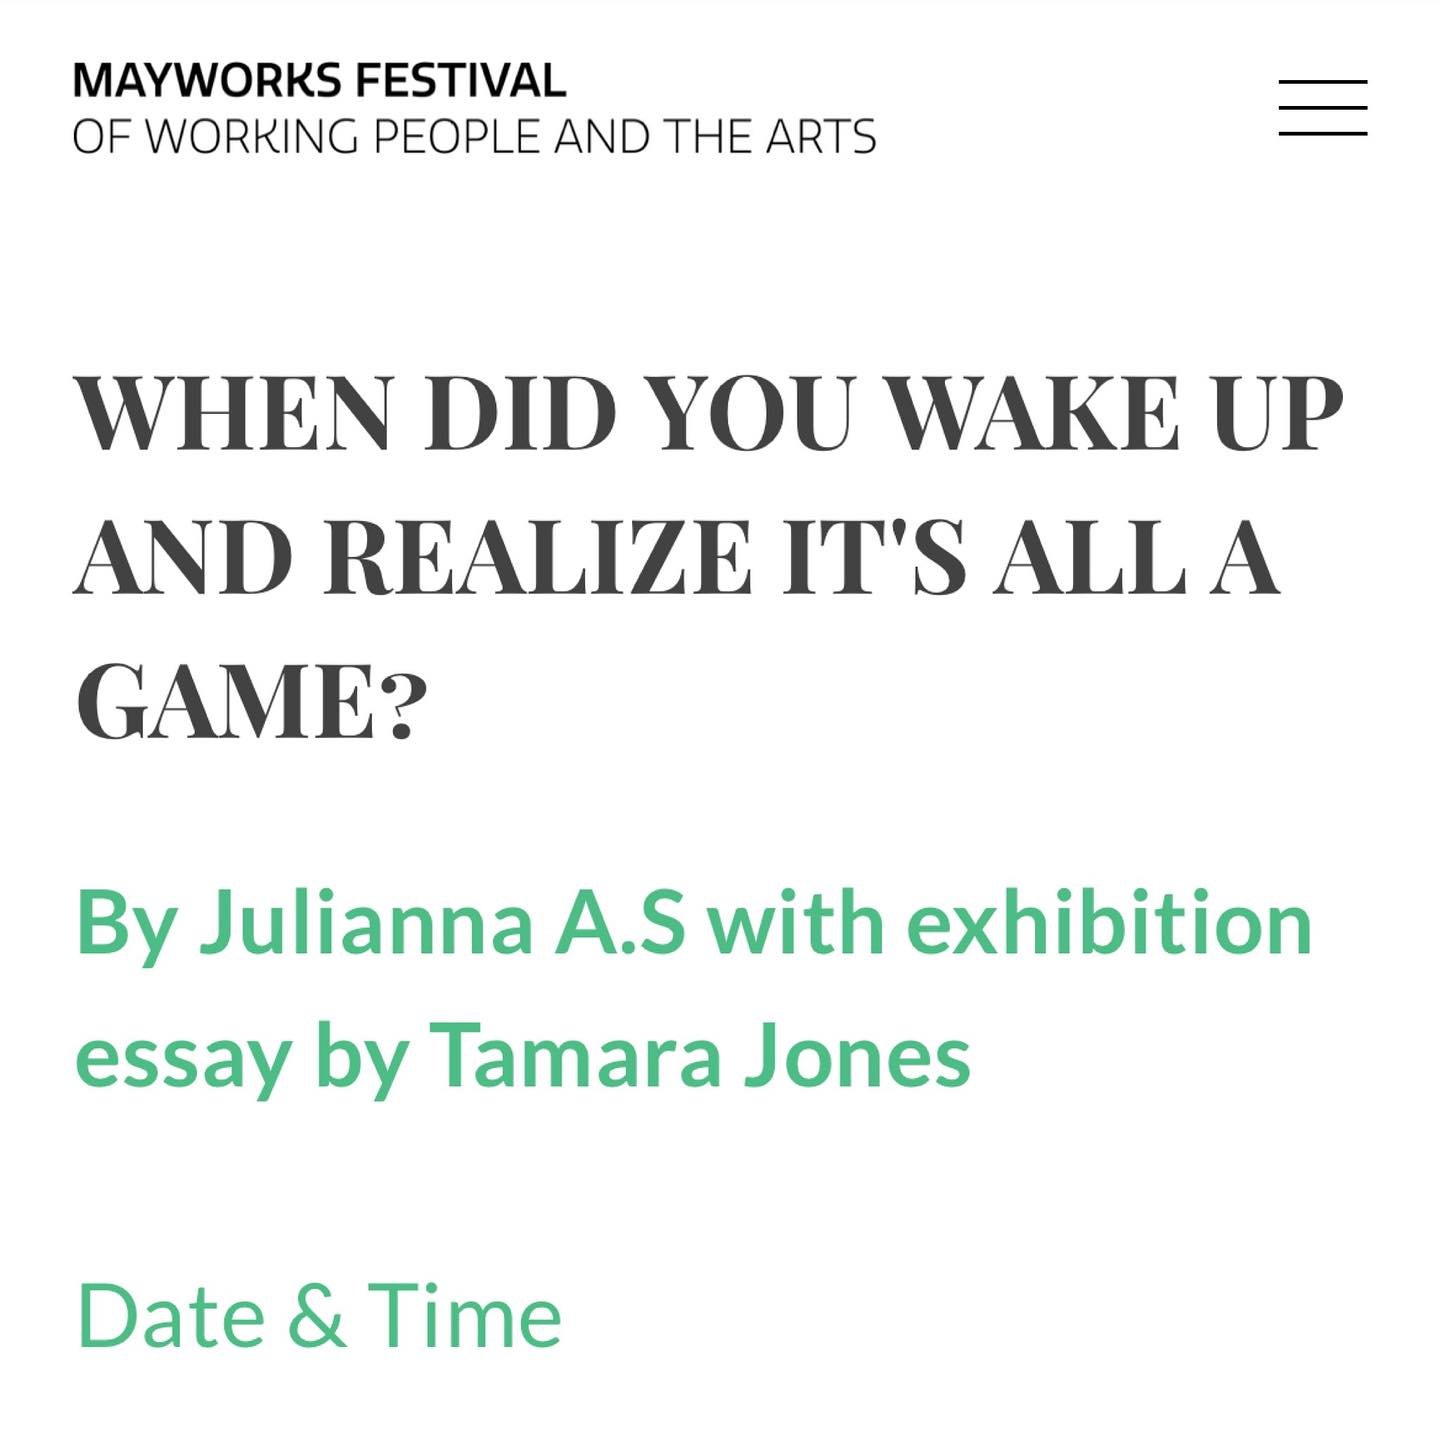 Mayworks @mayworkstoronto is almost here. 
When did you Wake up and realize it&rsquo;s all a game ? 

https://mayworks.ca/festival-2024/all-a-game

Julianna A.S Exhibition May 4th-31st @whippersnappergallery 
Tamara Jones Essay 
May 18th, Artist Talk